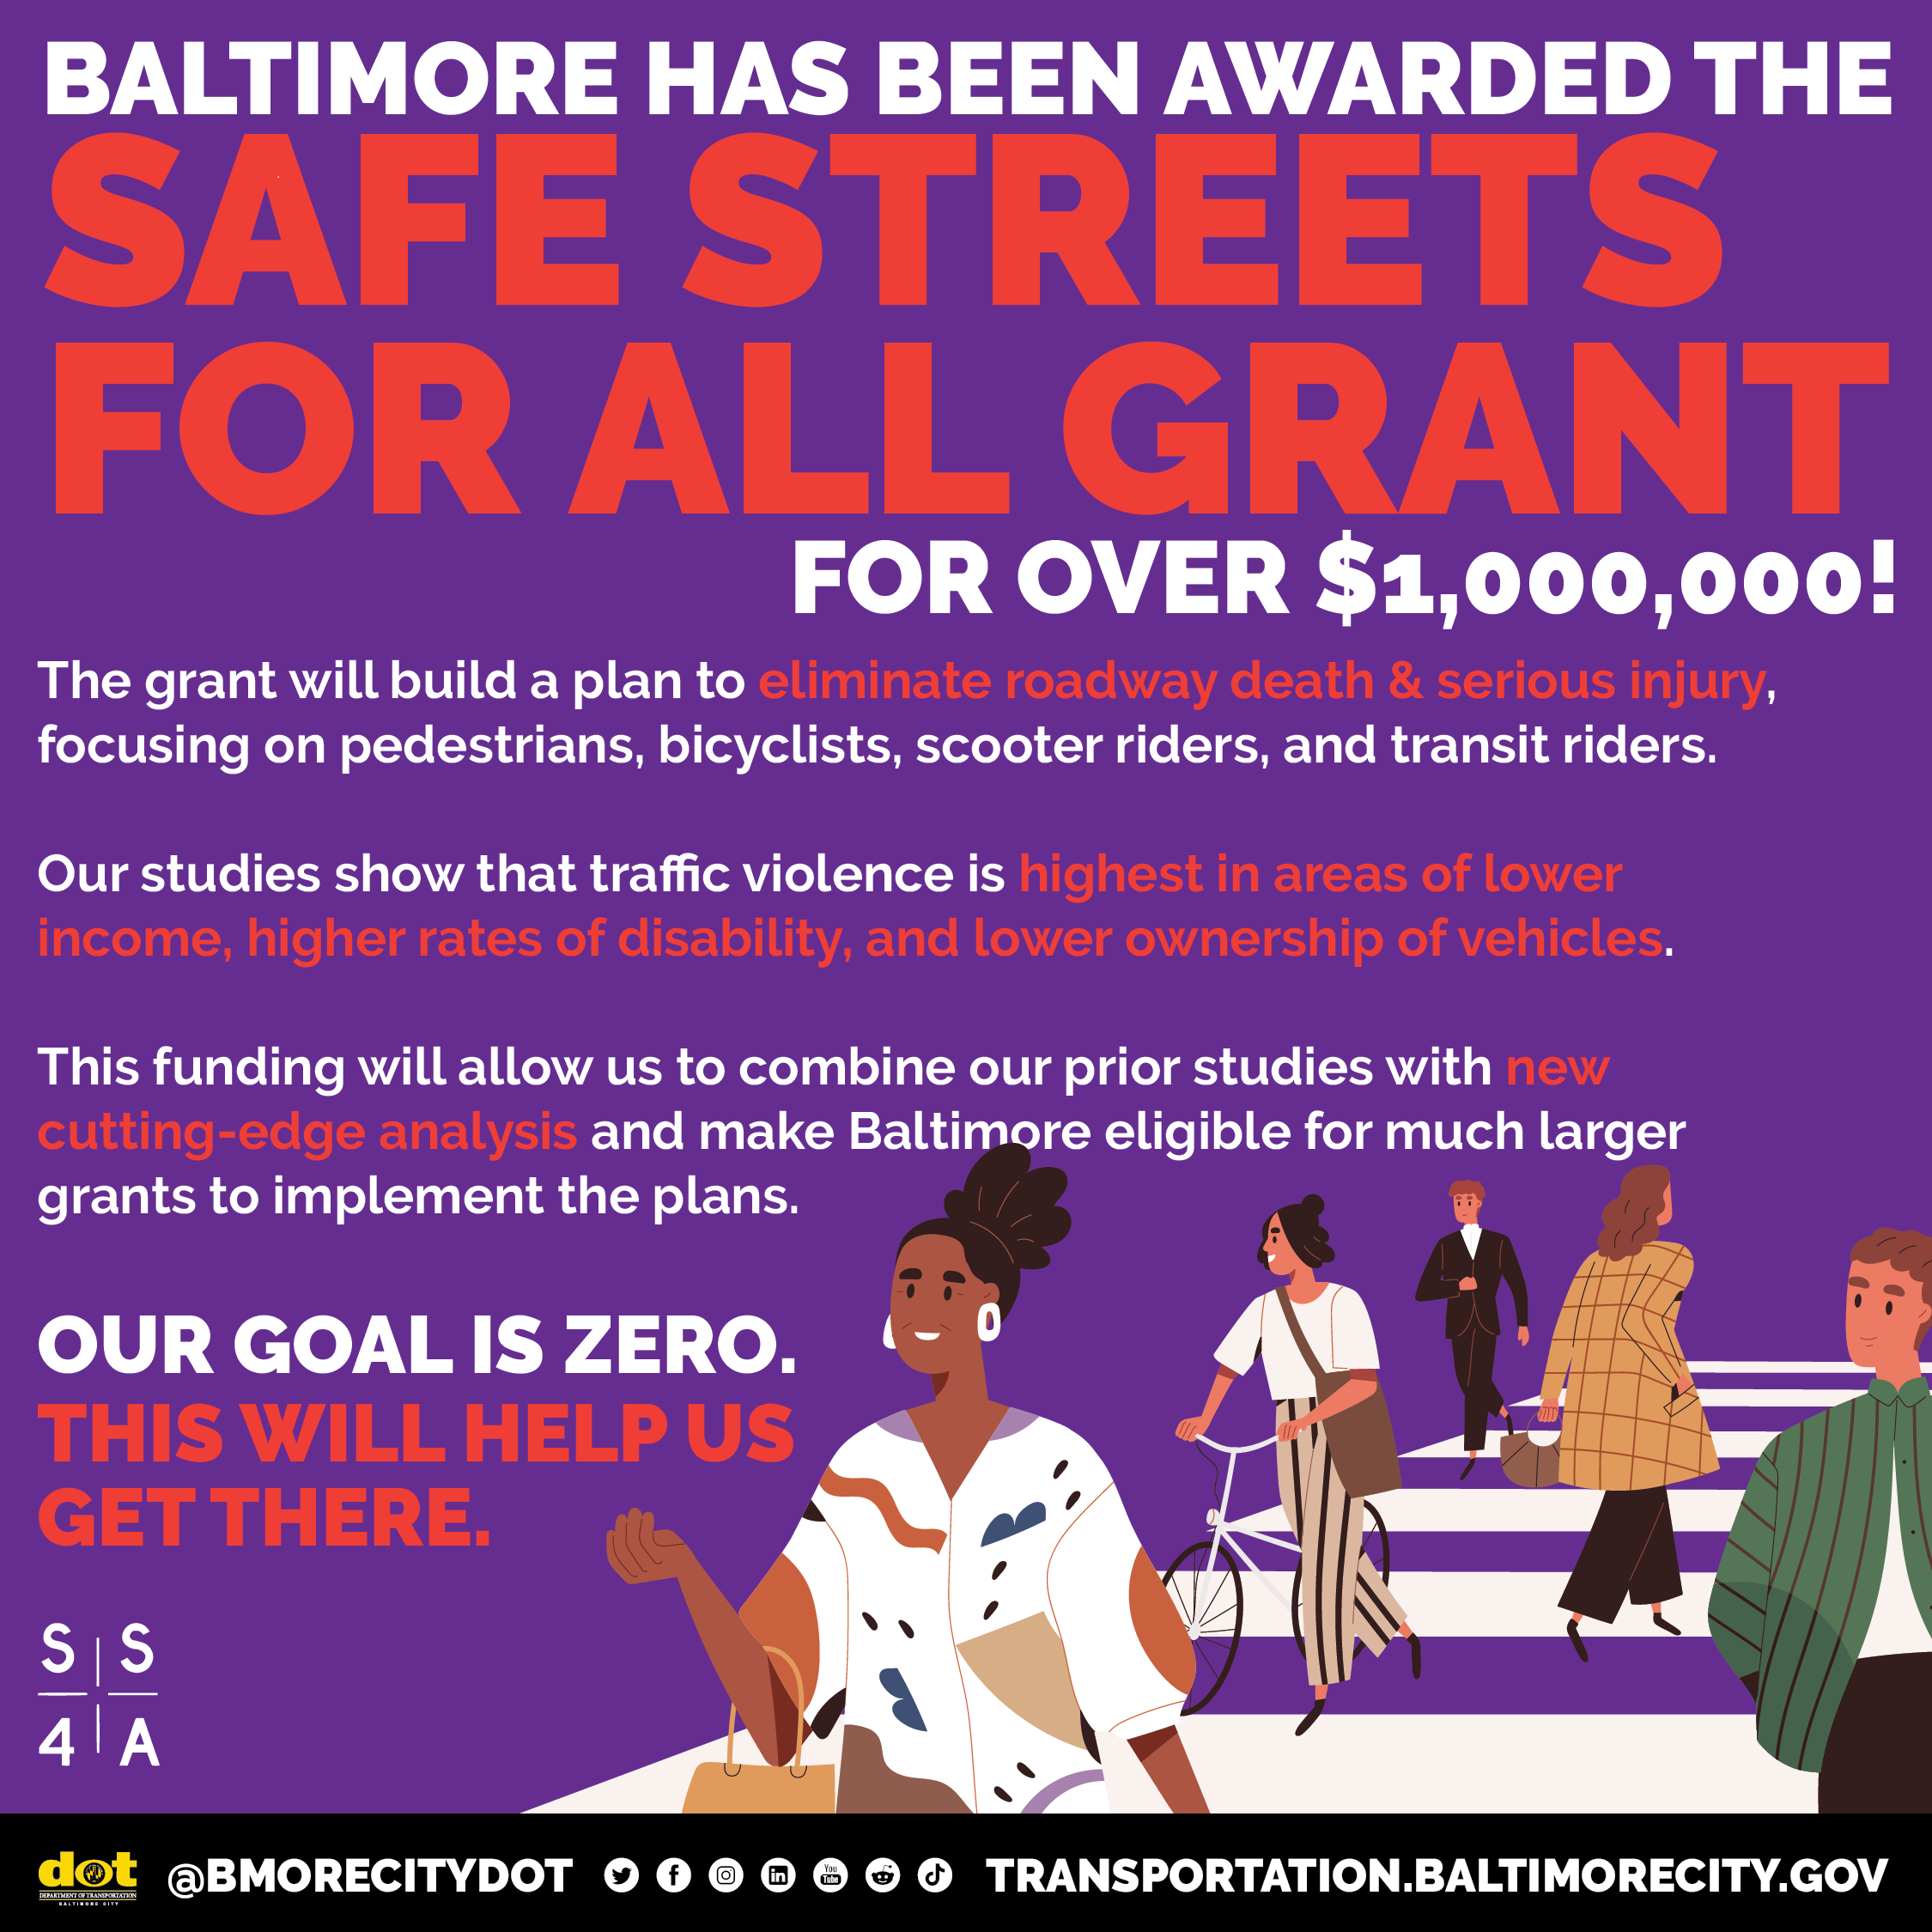 Baltimore has been awarded a Safe Streets for All grant for over $1,000,000!